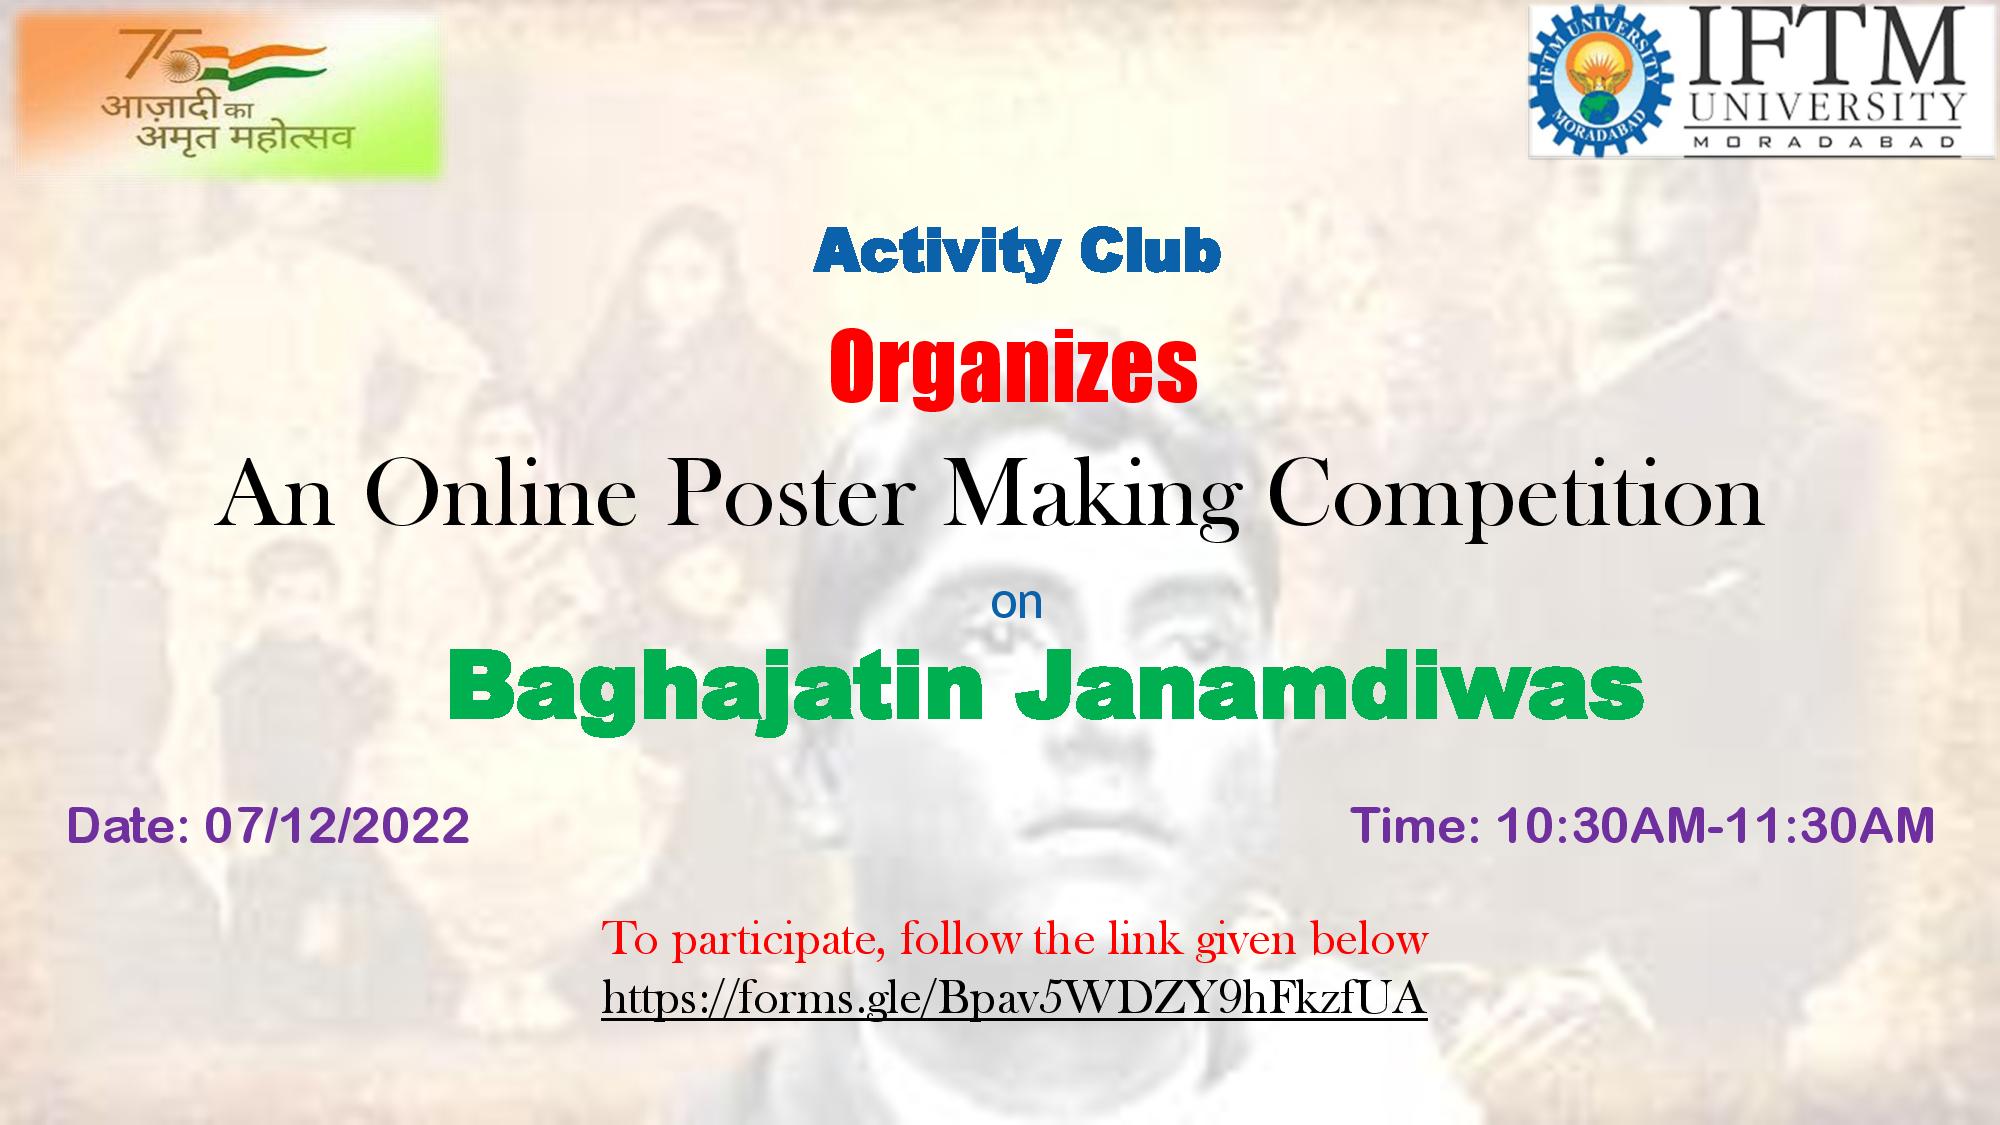 Online Poster Making Competition on Baghajatin Janamdiwas